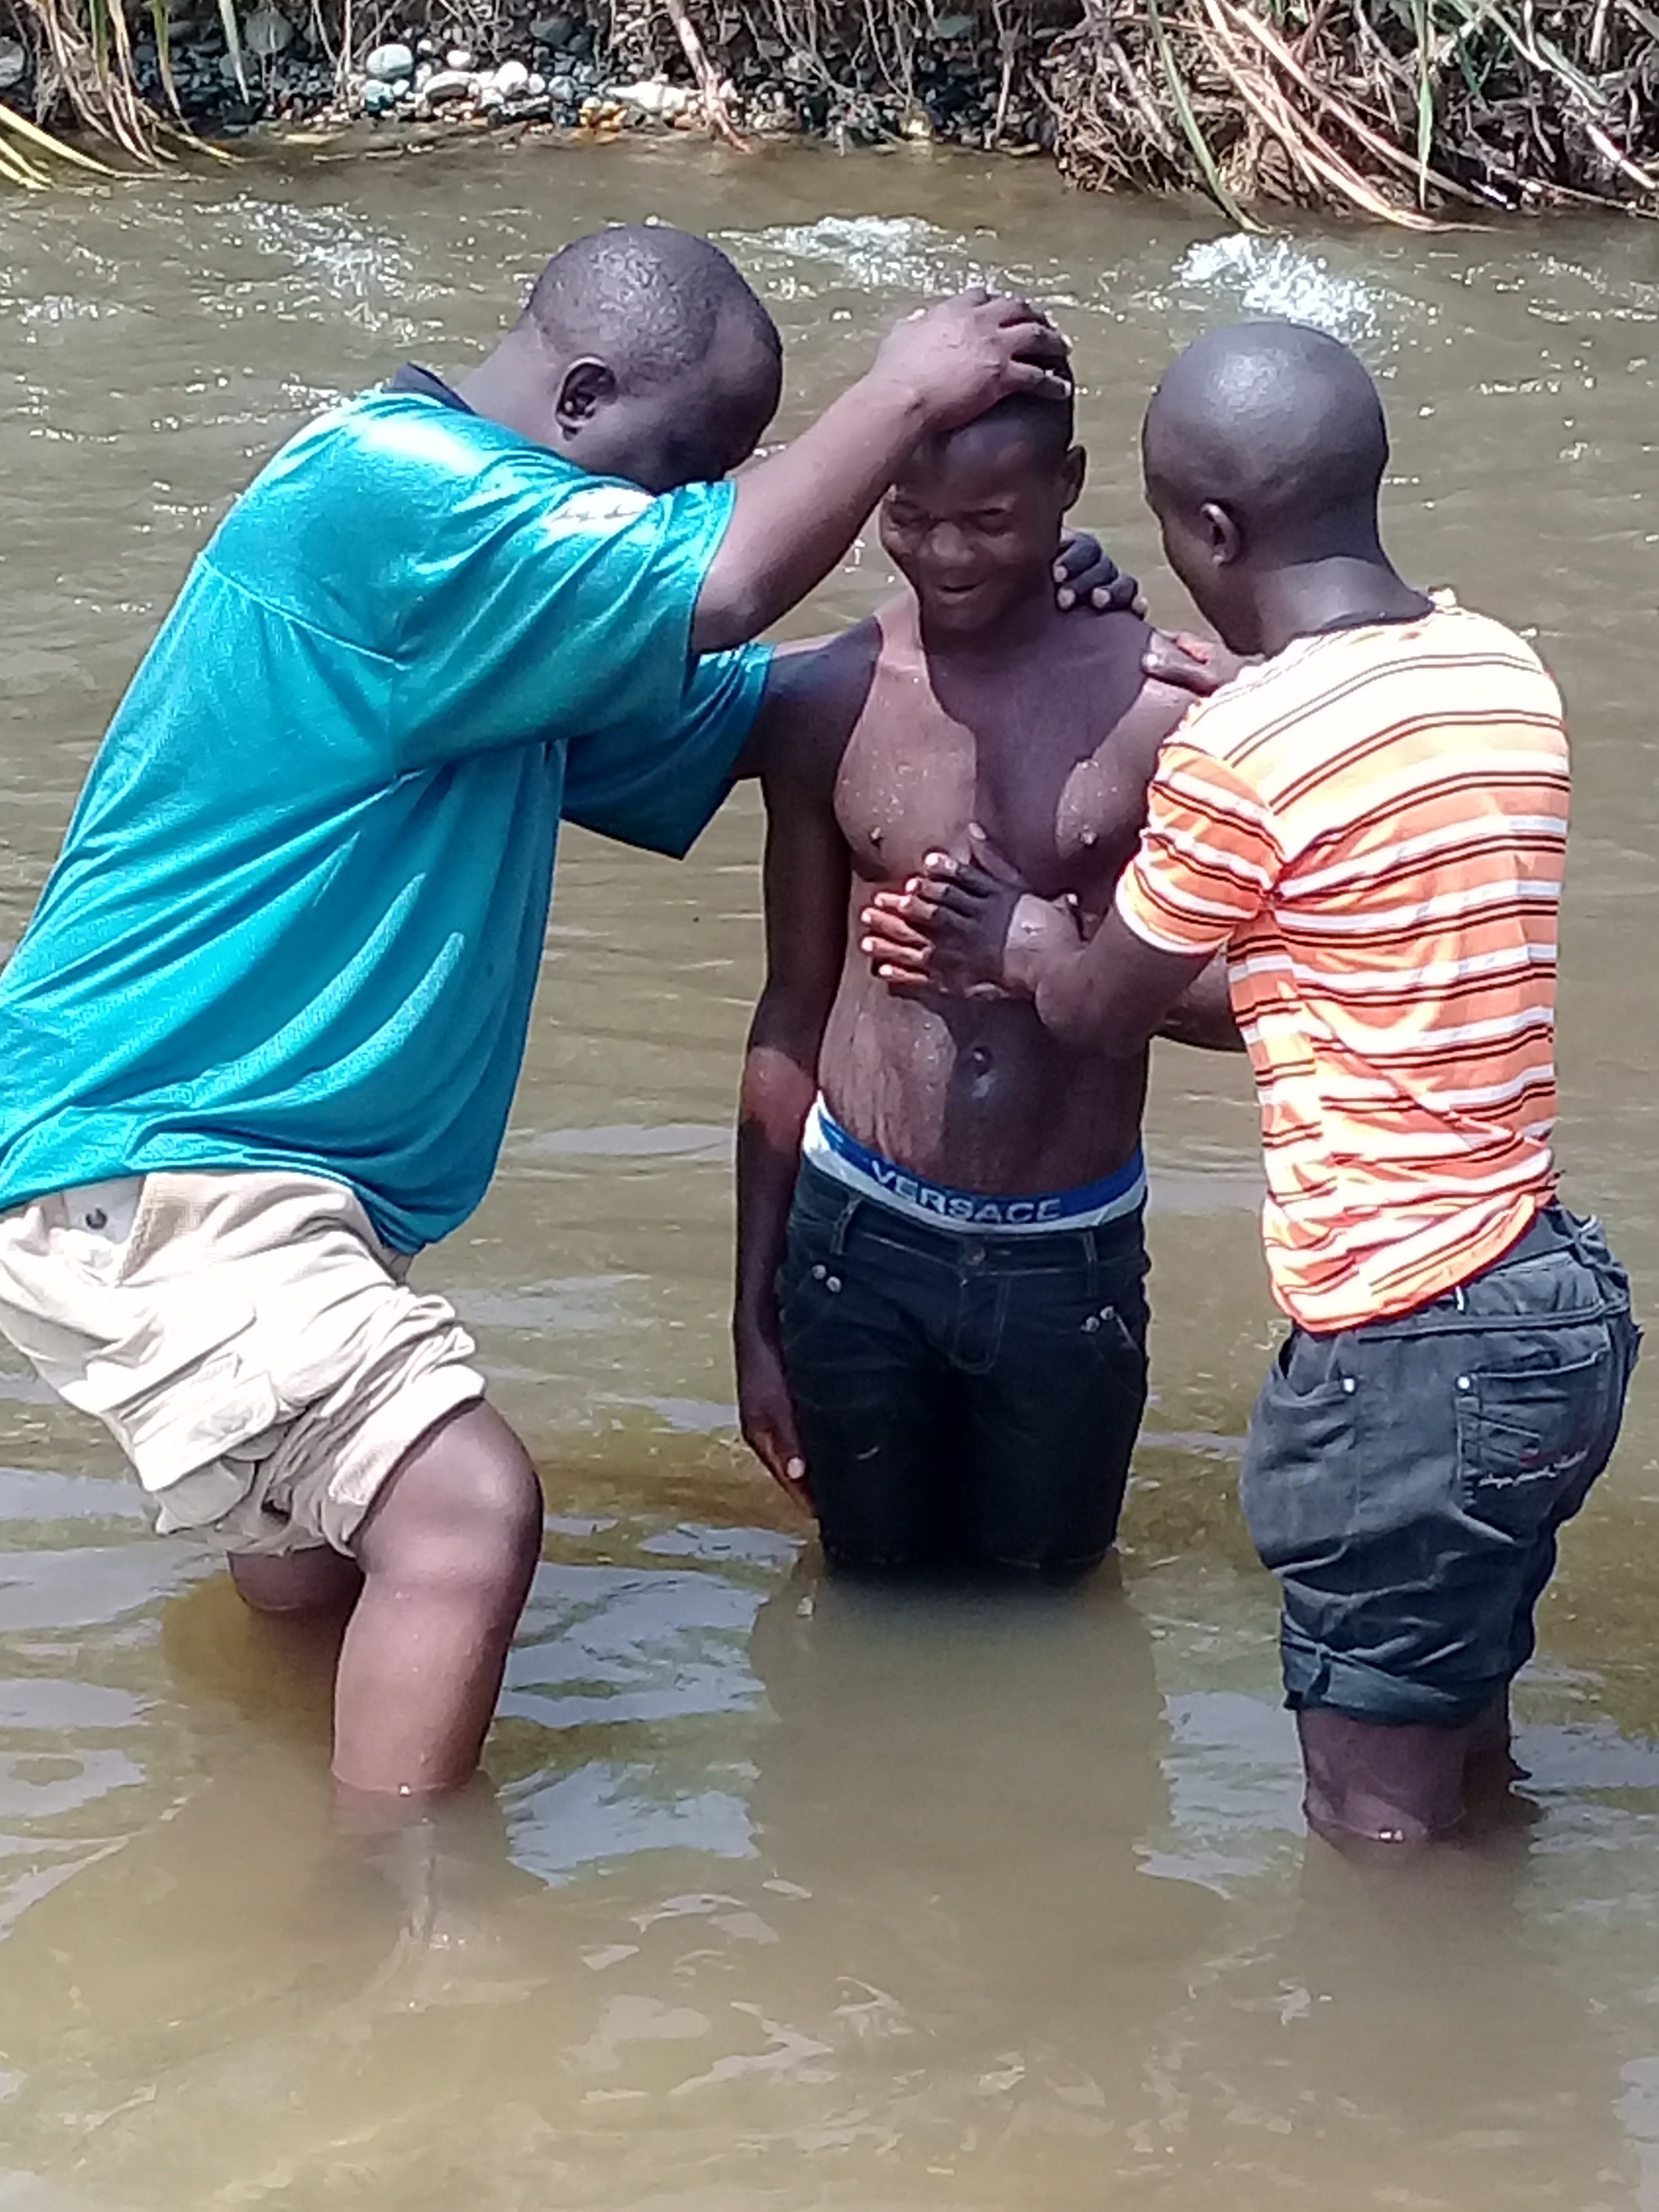 Another baptism in Uganda